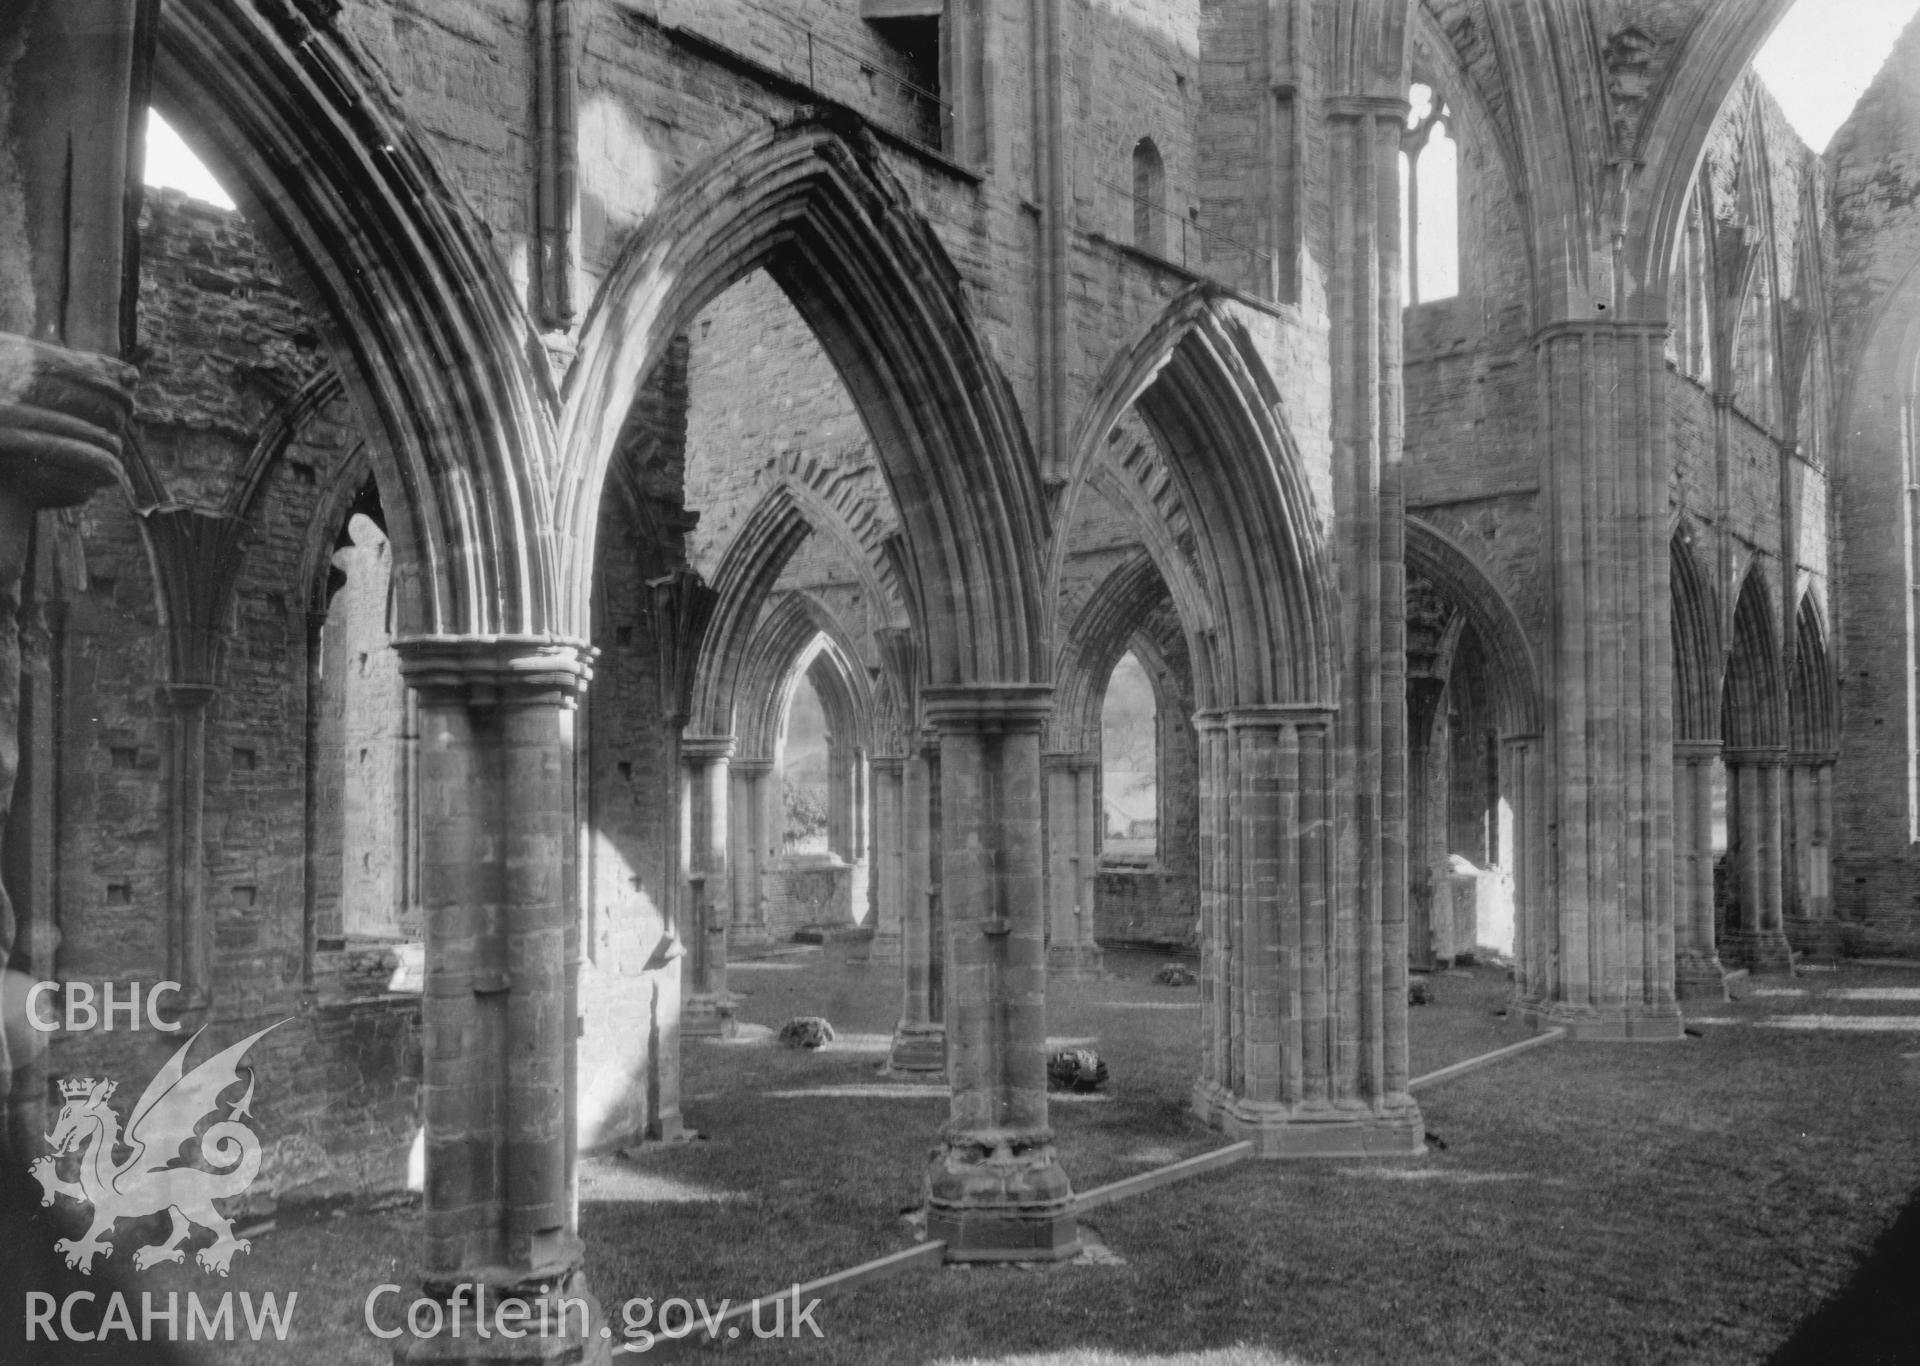 Digital copy of a photograph showing Tintern Abbey taken by F H Crossley, c.1948.